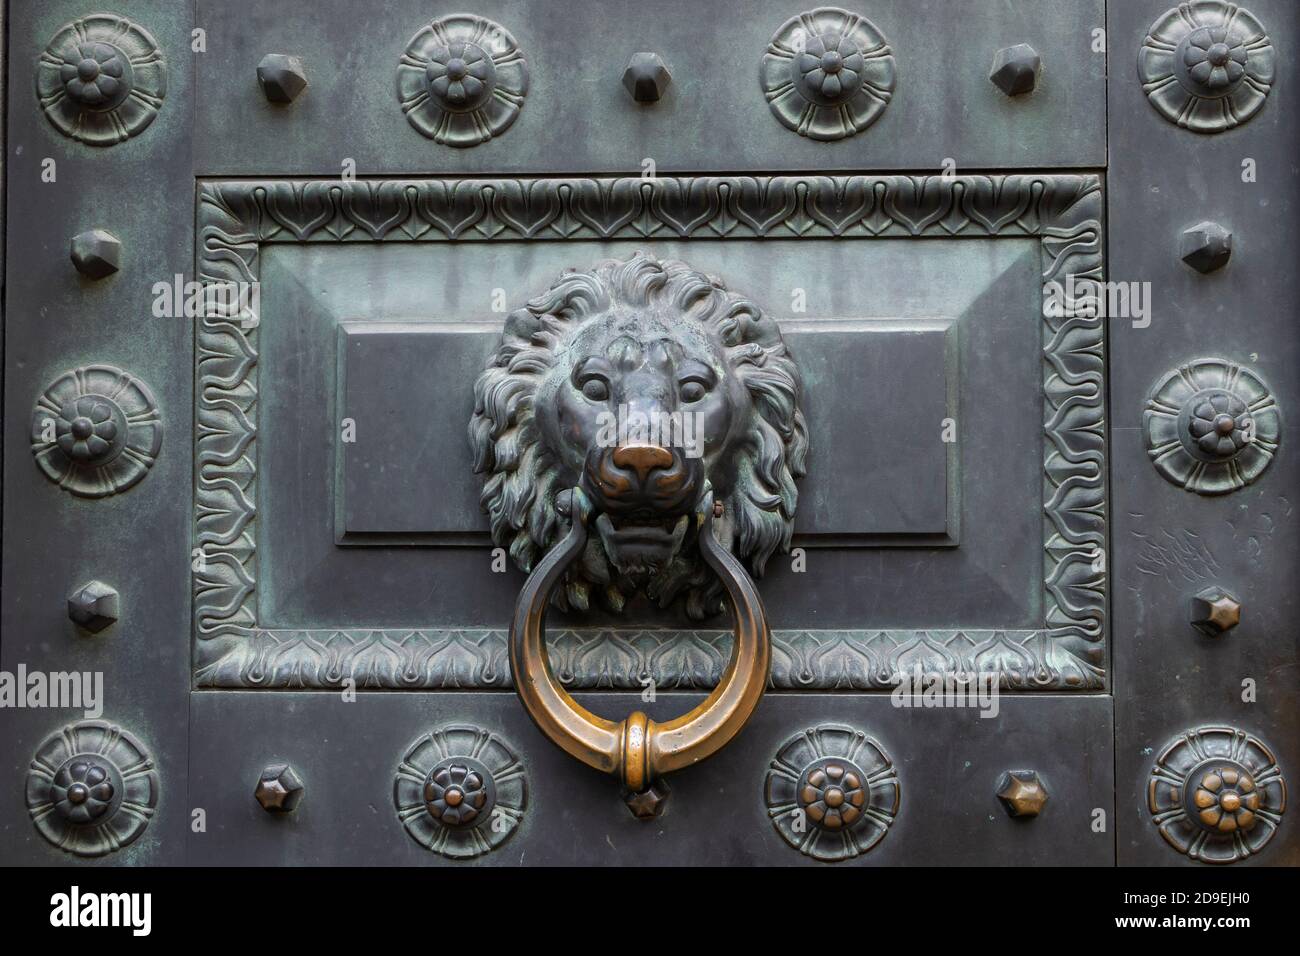 Antique bronze door knocking knob ring in the form of a lion's face on an old door. Stock Photo